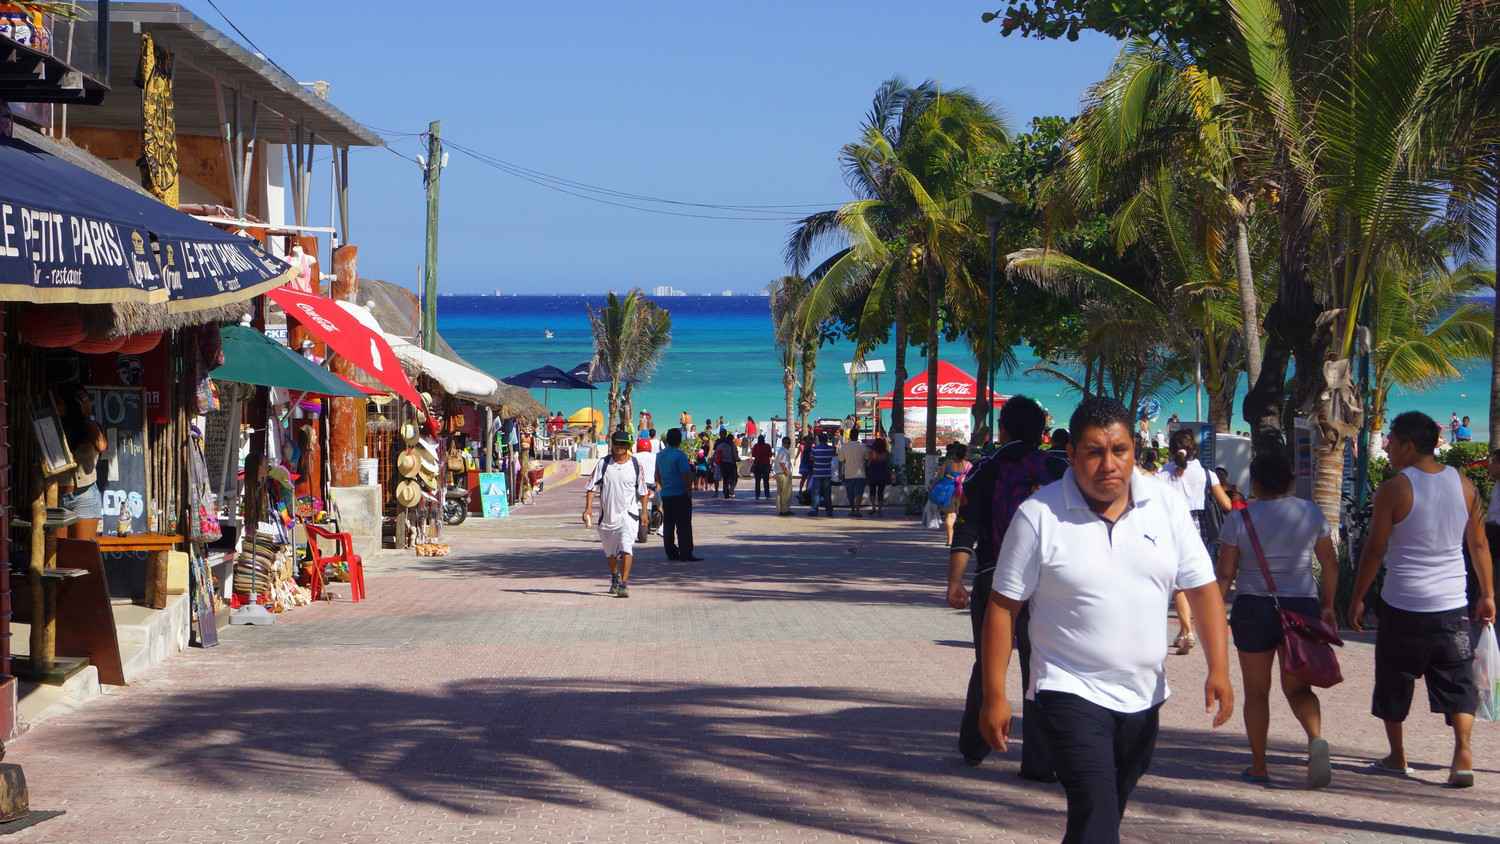 A view of the aqua blue water and beach with Cozumel visible in the background.